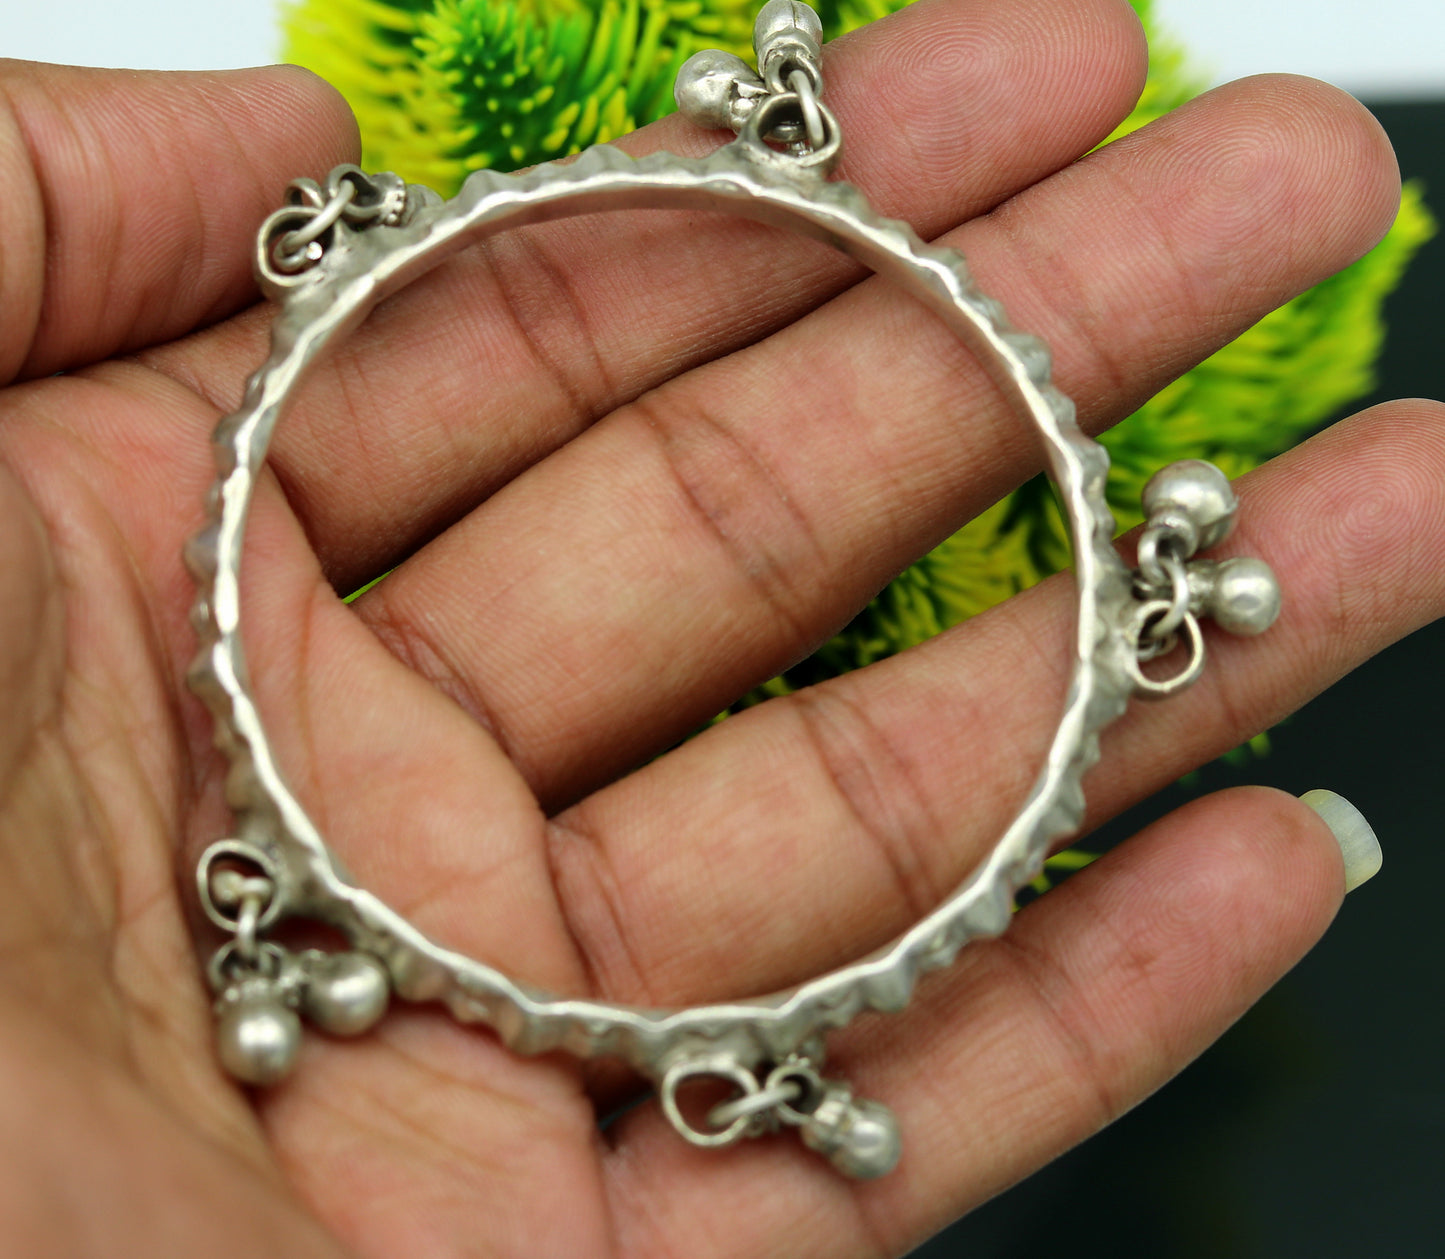 Genuine Vintage antique handmade solid silver old used charm bangle bracelet with jingle bells tribal customized belly dance jewelry sba20 - TRIBAL ORNAMENTS